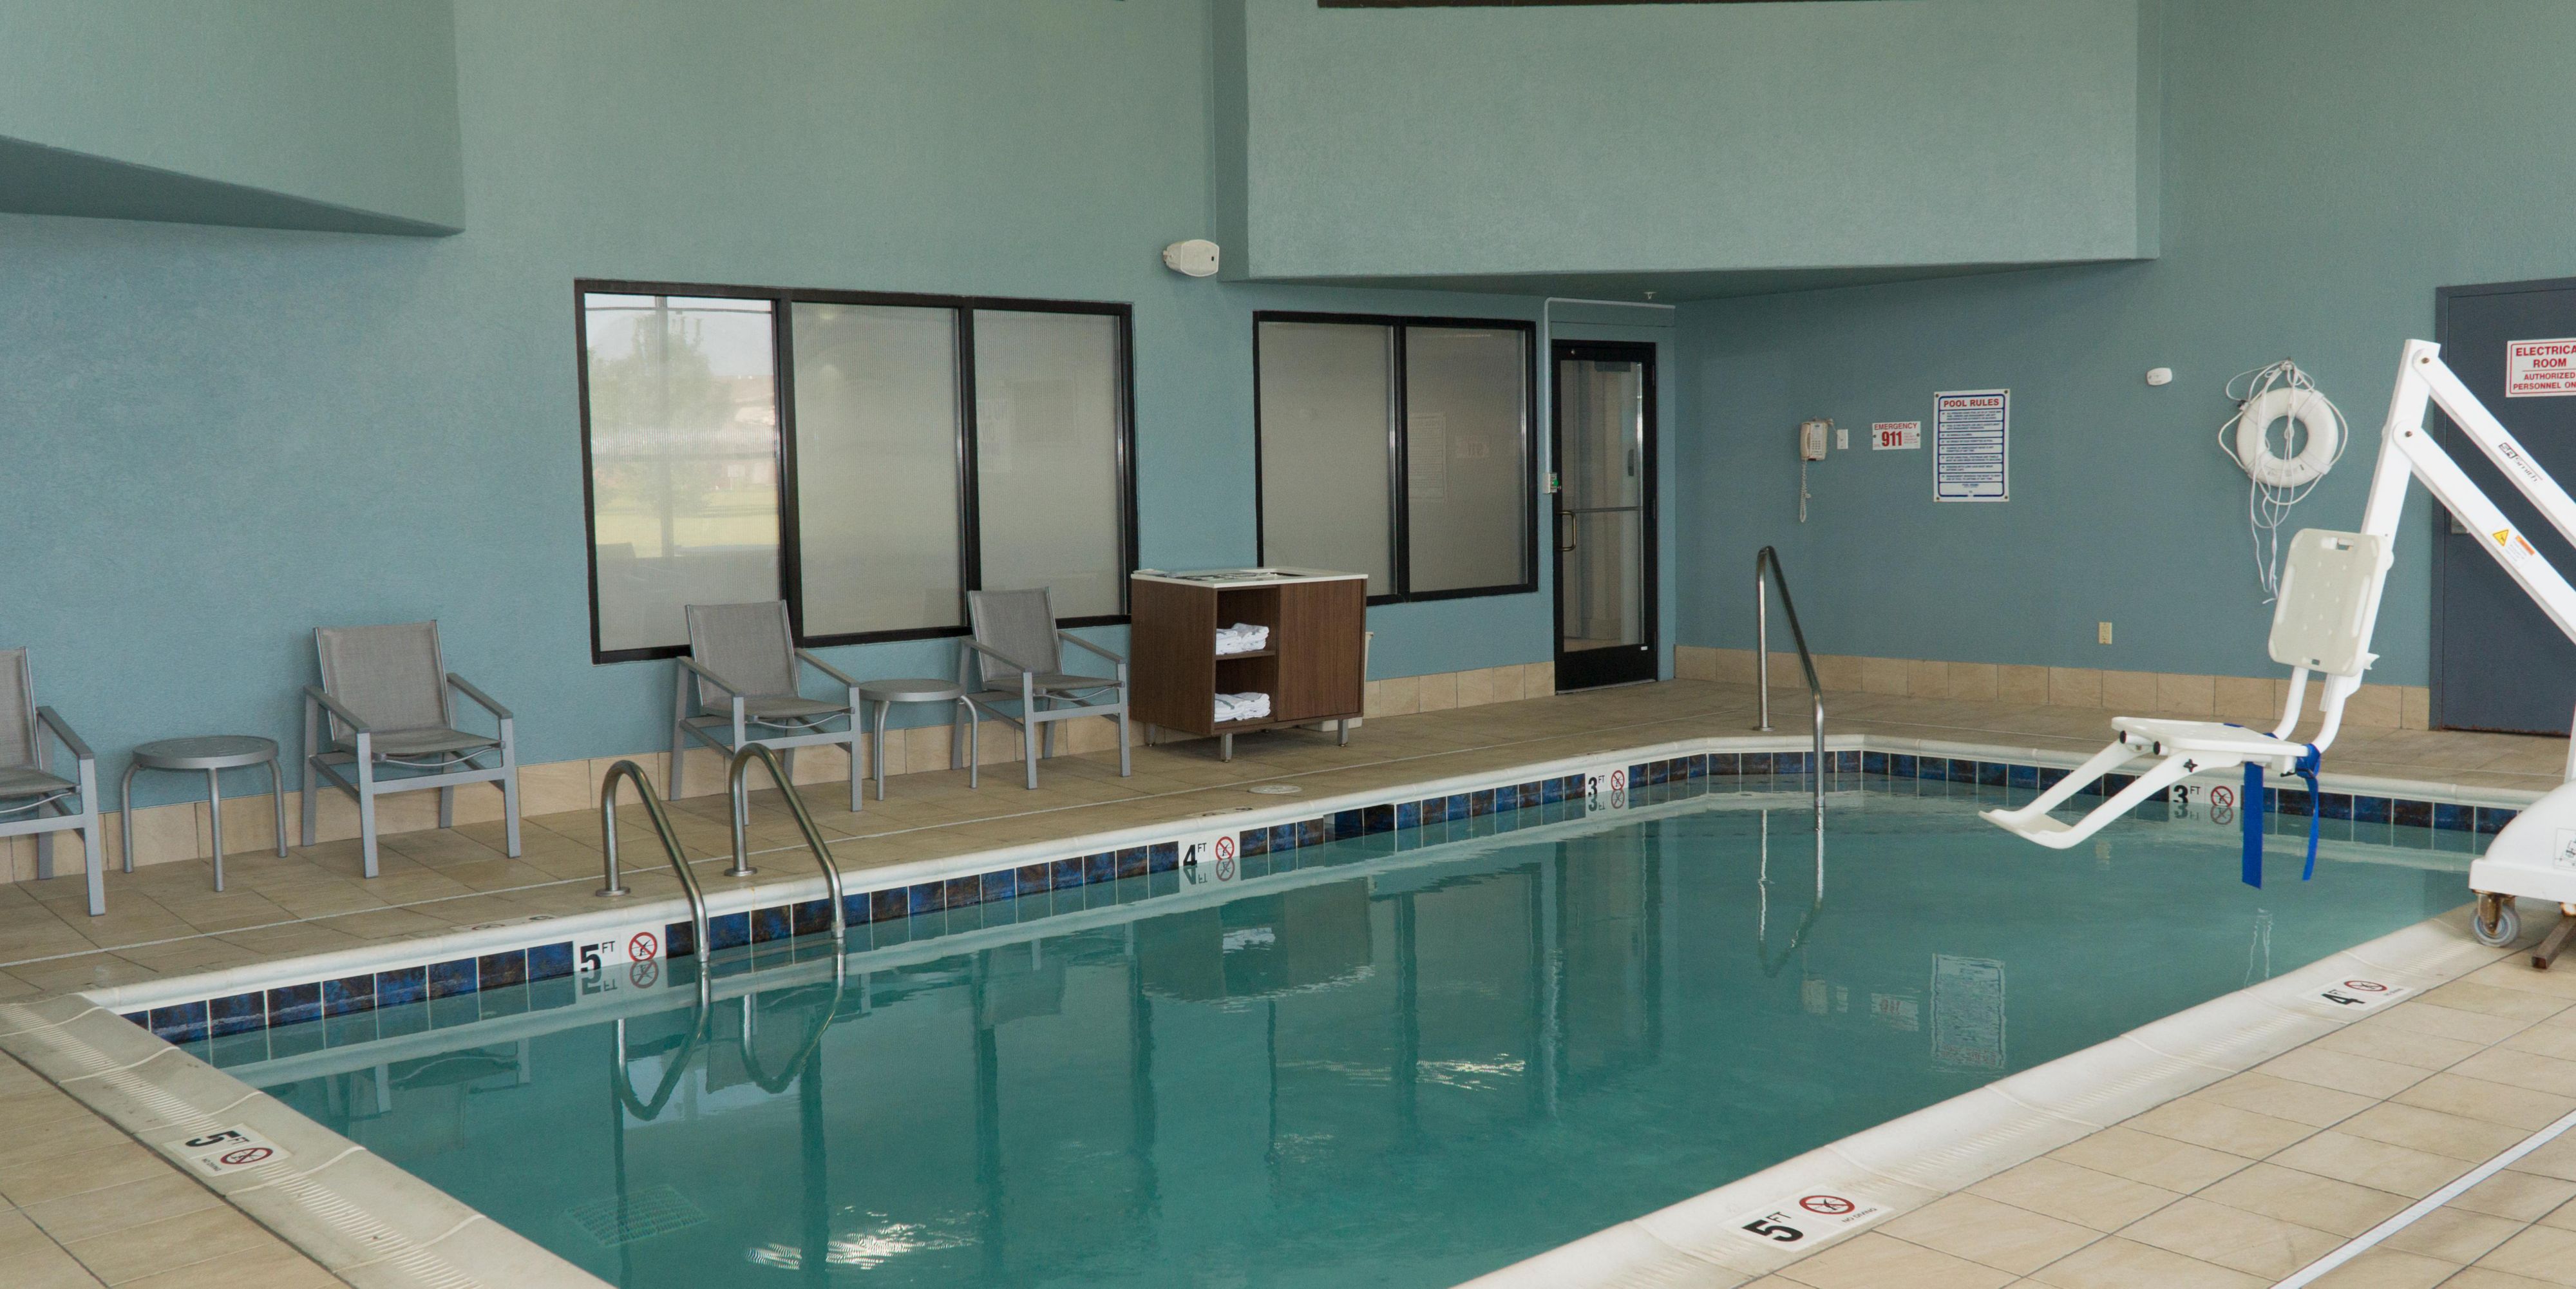 Regardless of the weather outside, you can enjoy our indoor pool from 10 am to 10 pm daily. 